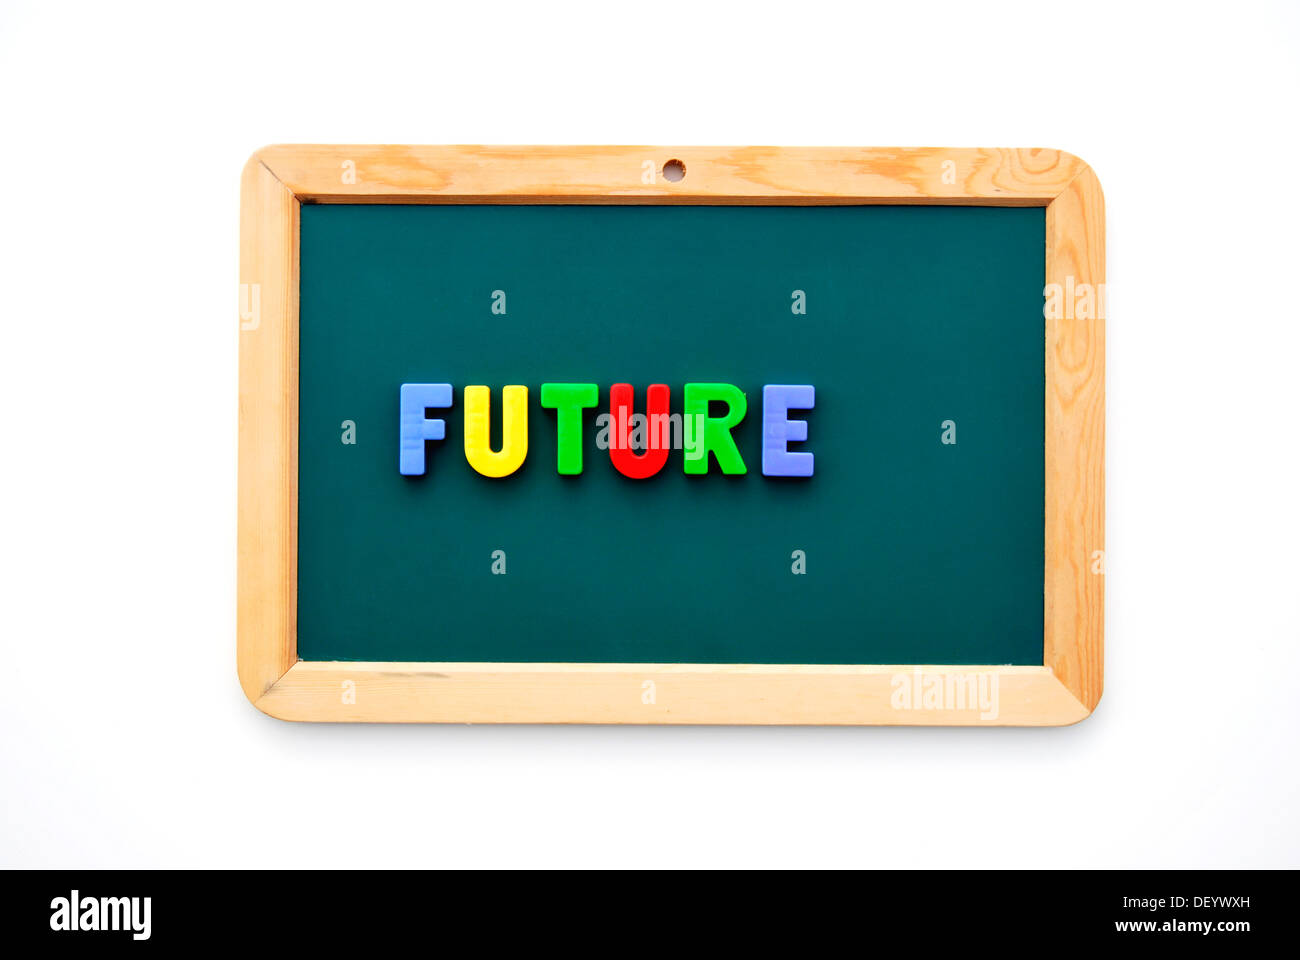 Future, written with colourful magnetic letters on a child's blackboard Stock Photo